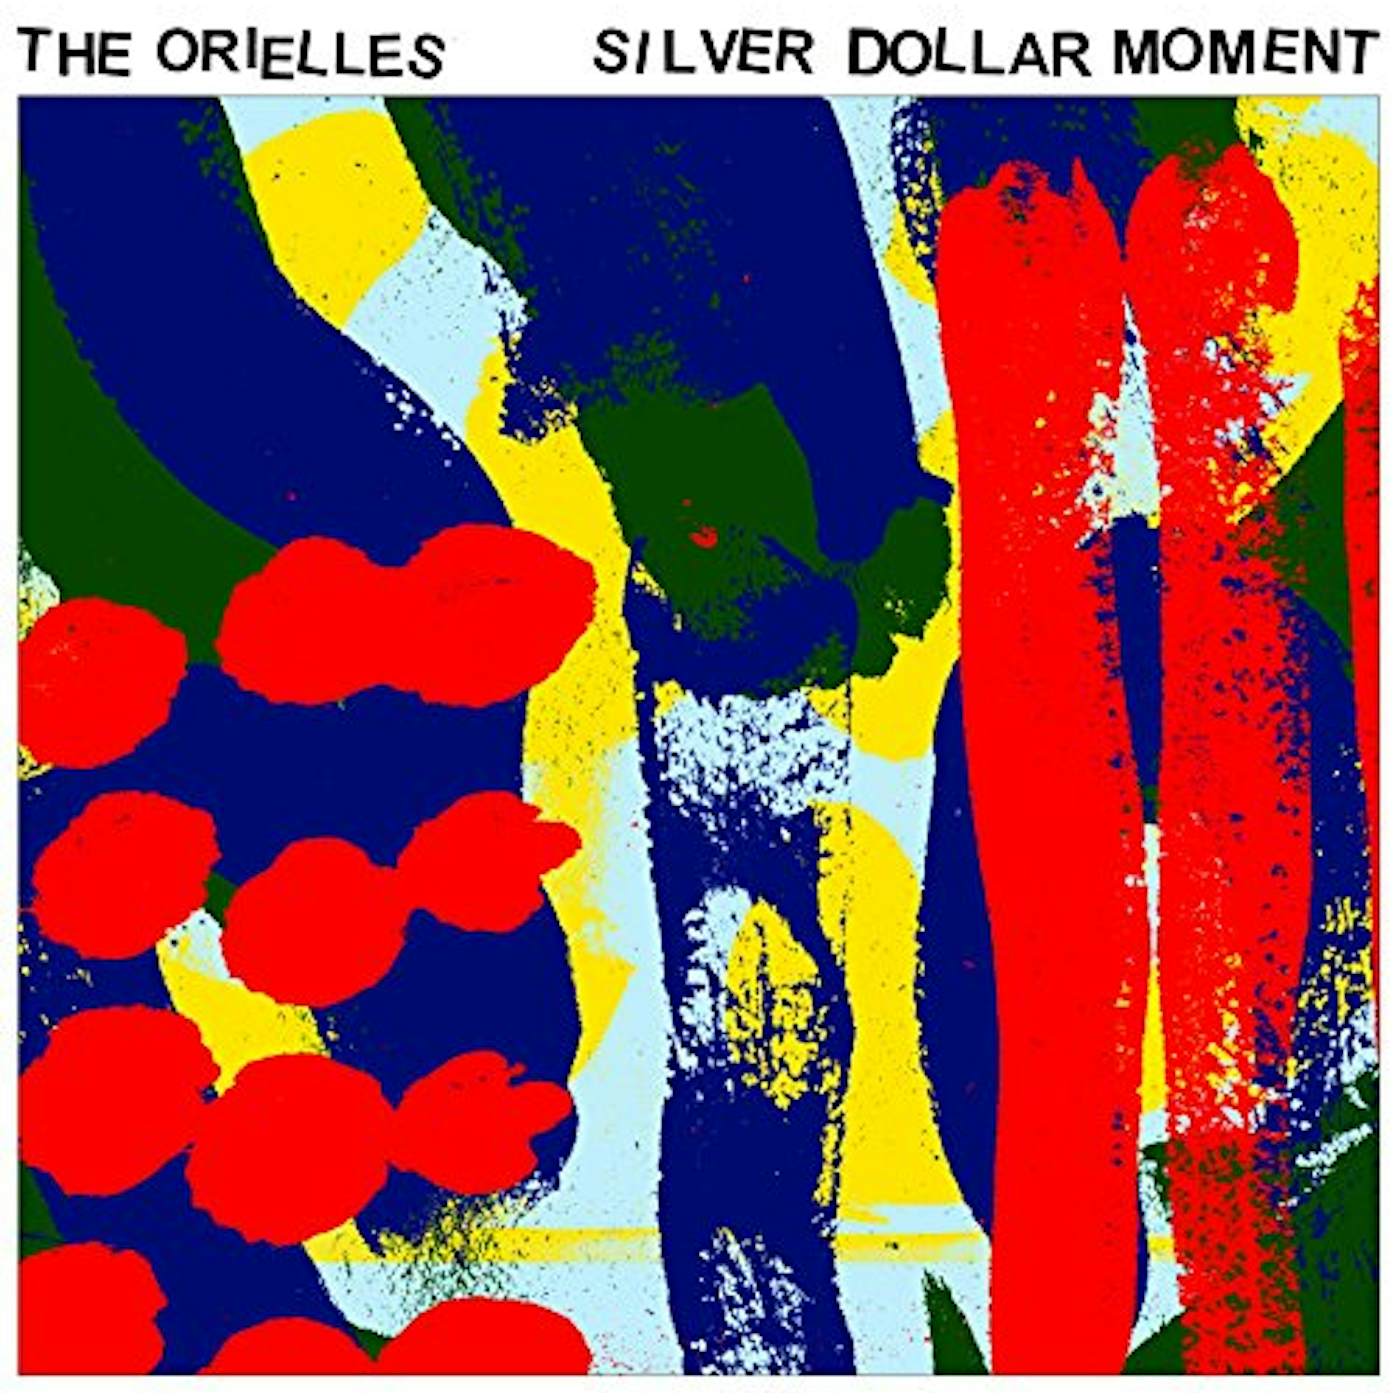 The Orielles SILVER DOLLAR MOMENT CD